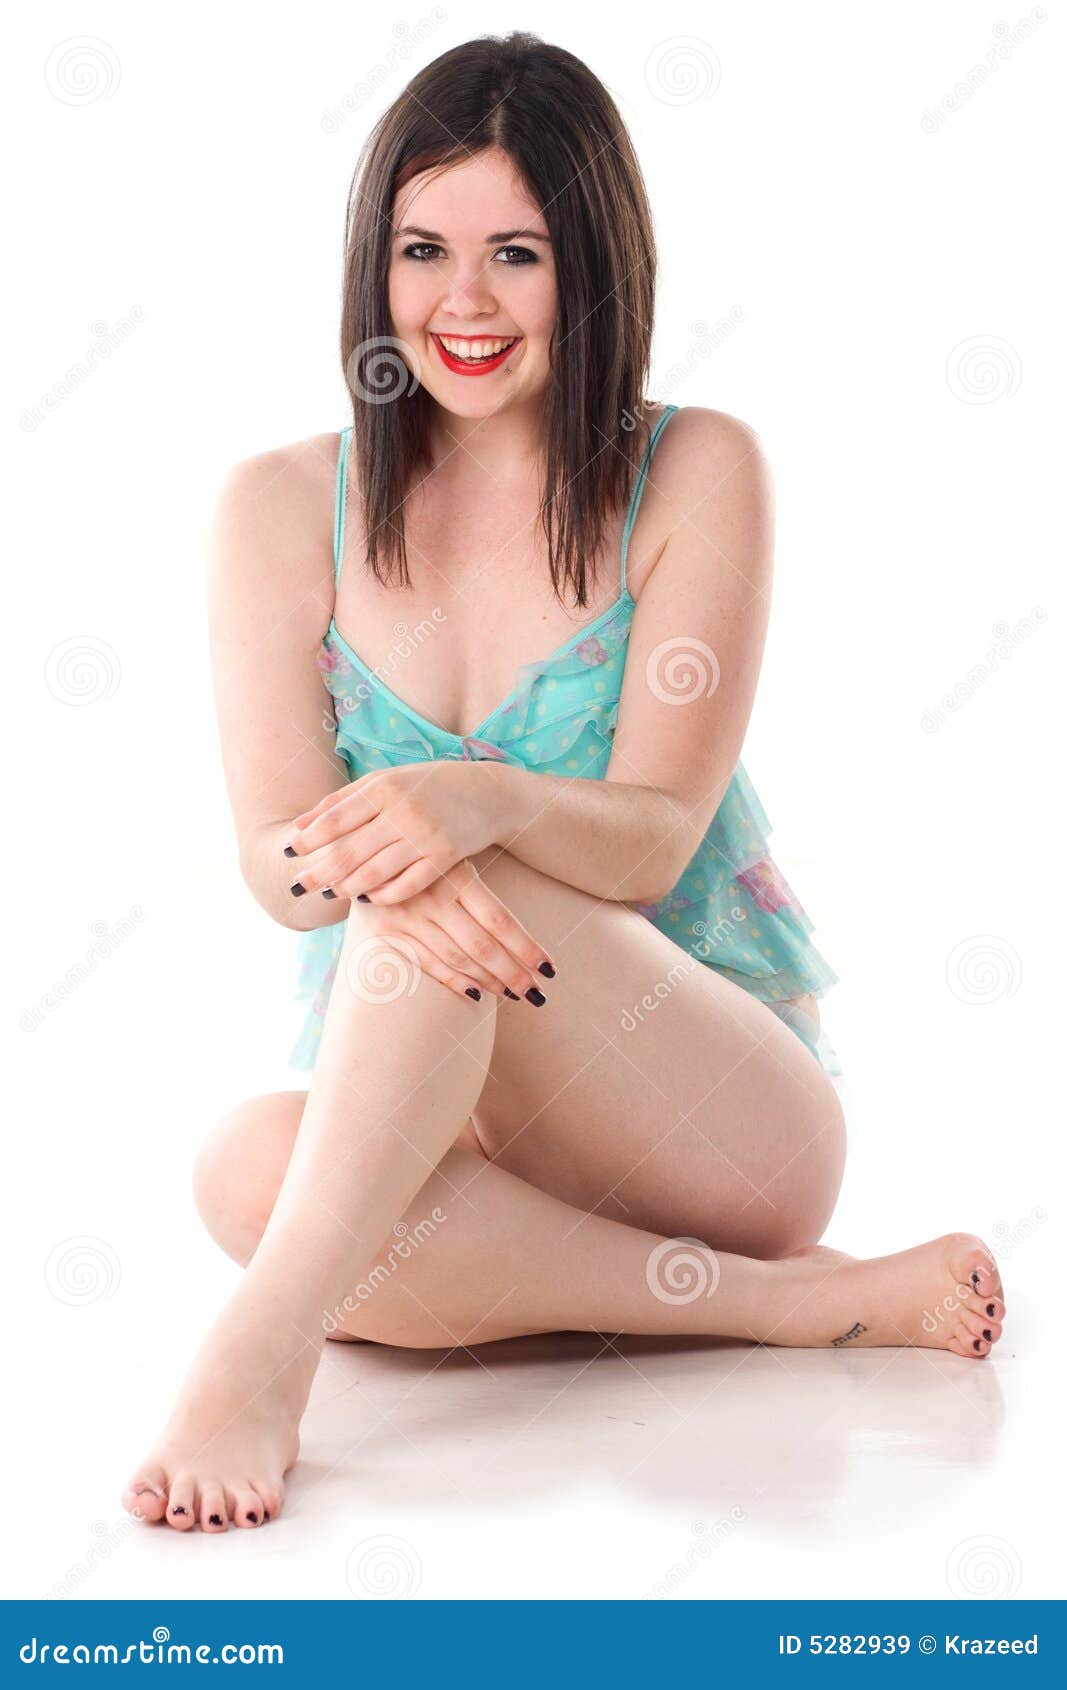 Cute Girl In Pin Up Pose In Lingerie Stock Image Image